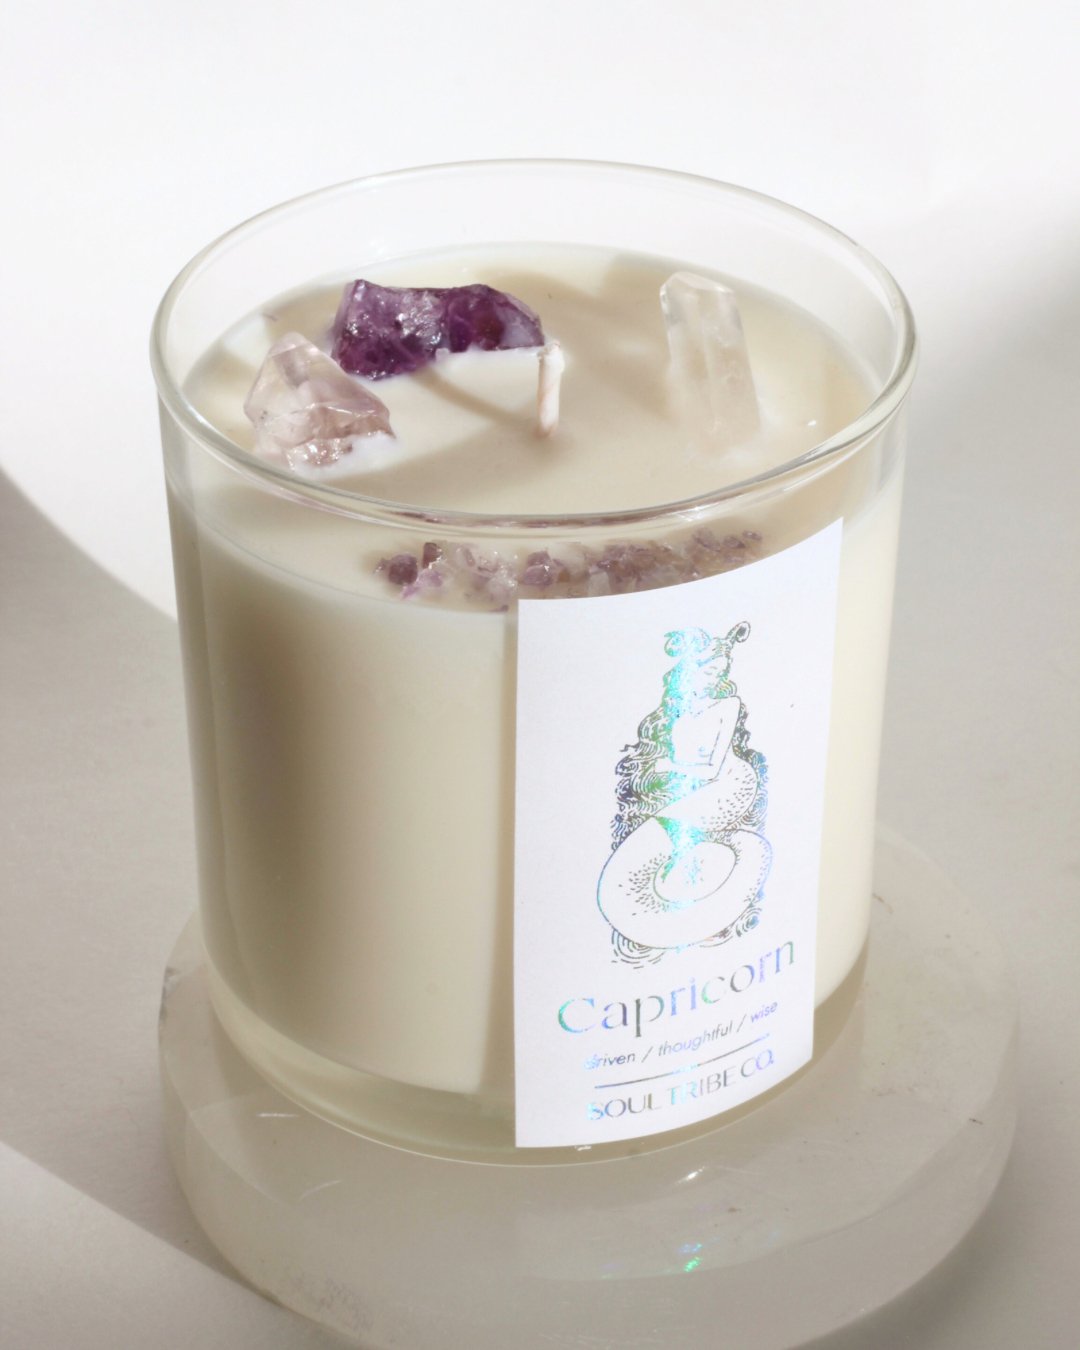 Capricorn Crystal Candle - Soul Tribe Co.